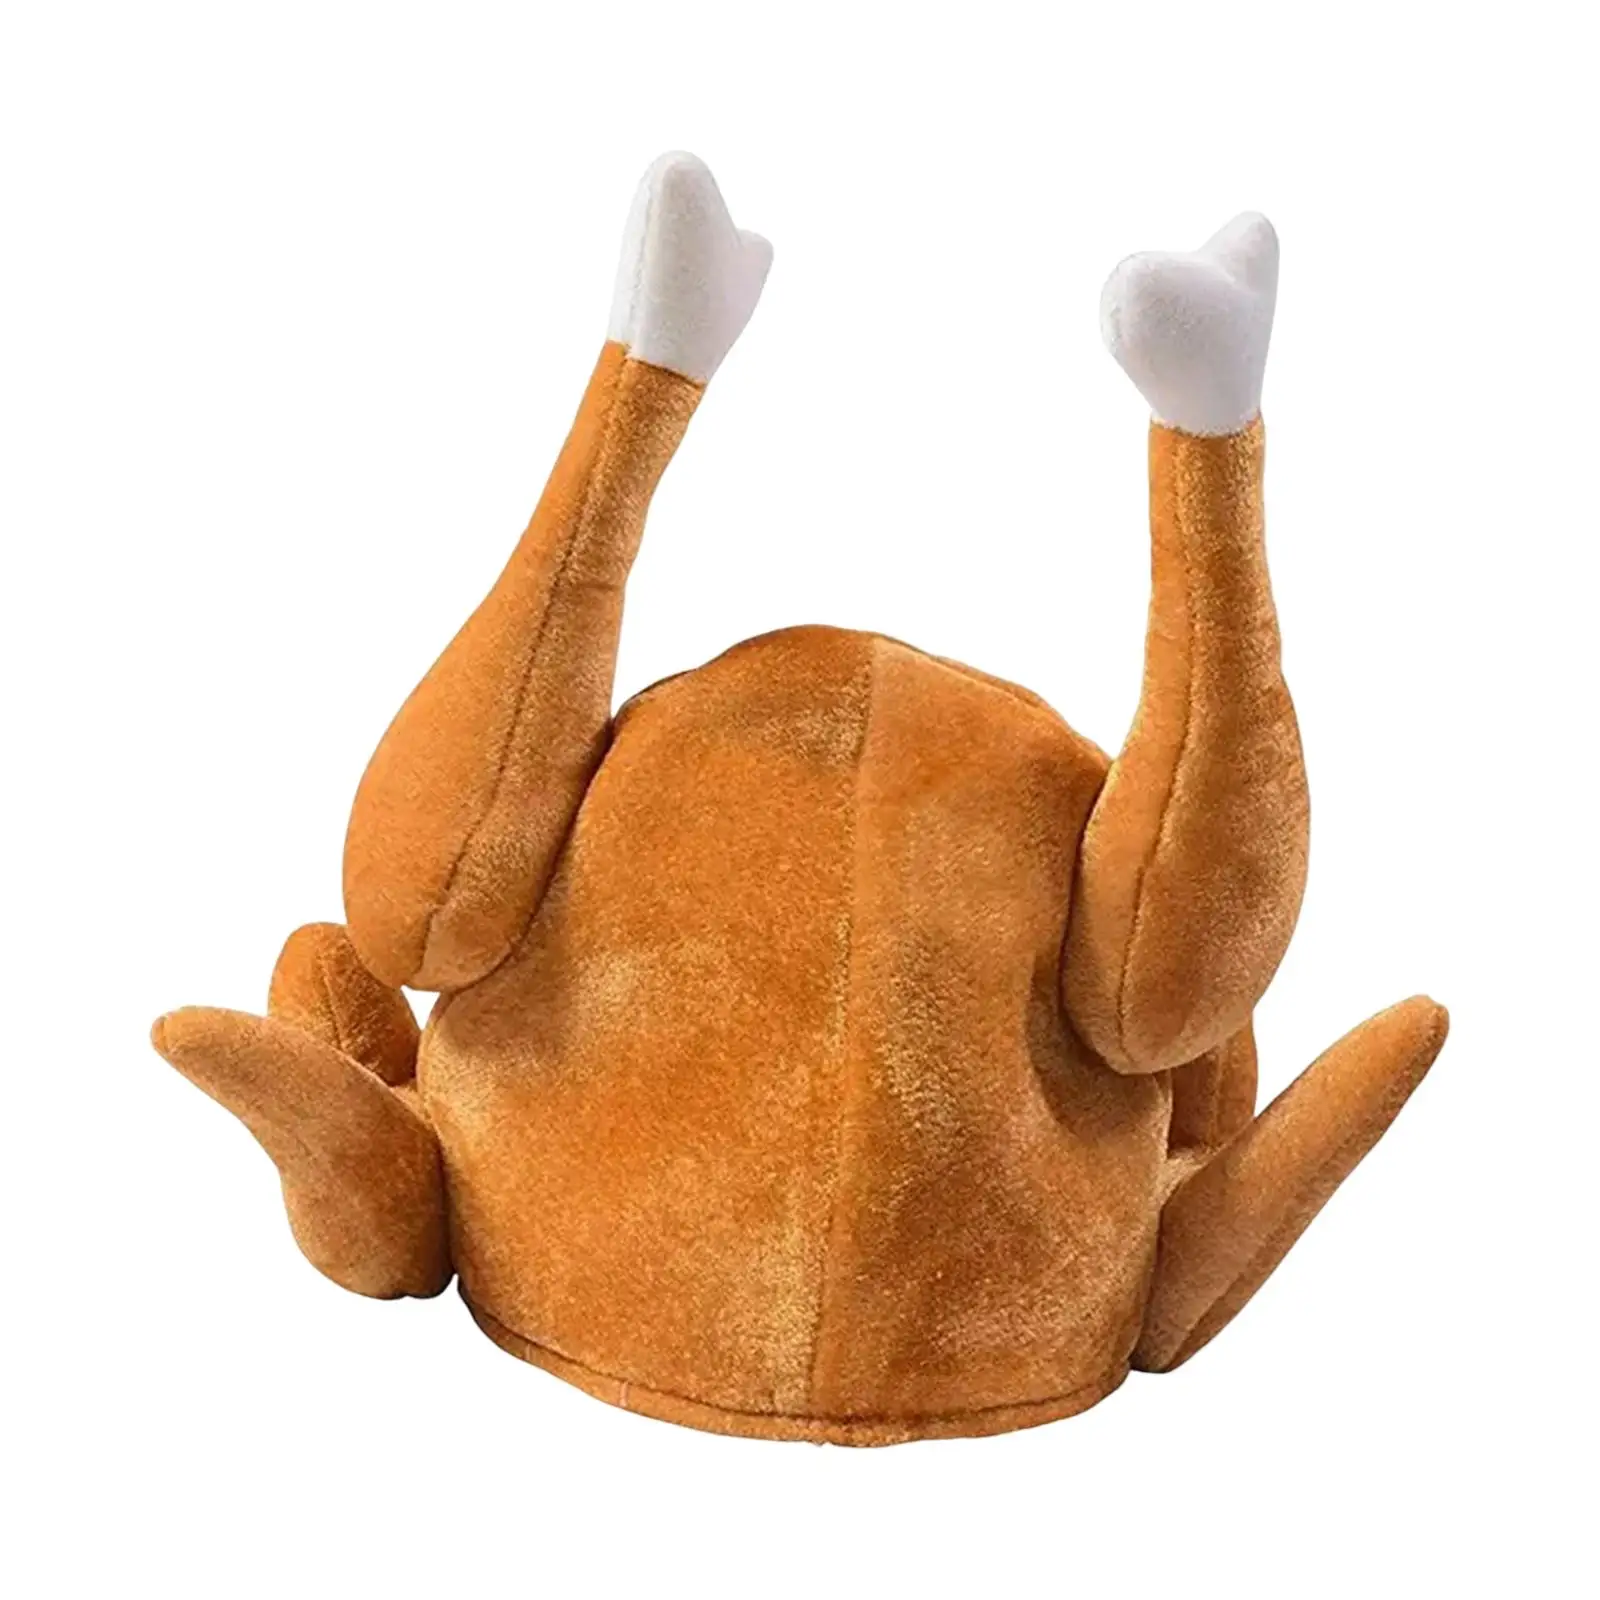 Funny Roasted Turkey Hat Chicken Costumes Accessories Creative for Xmas Stage Dressing Halloween Holiday Dressing Props